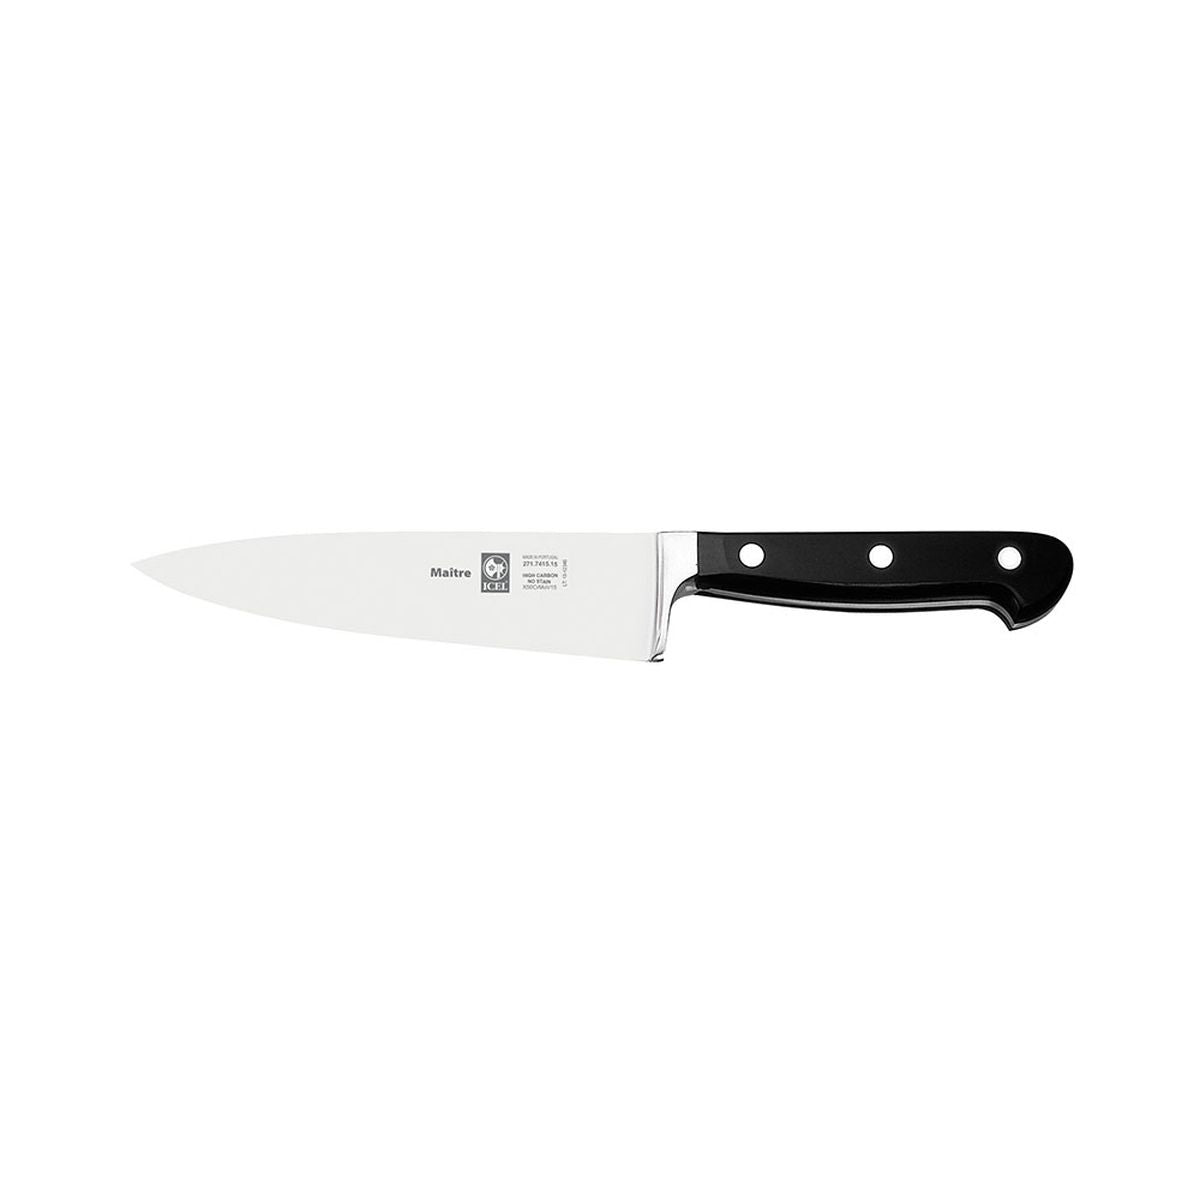 Cook's Knife - 150Mm (Im7415.15) from Icel. Sold in boxes of 6. Hospitality quality at wholesale price with The Flying Fork! 